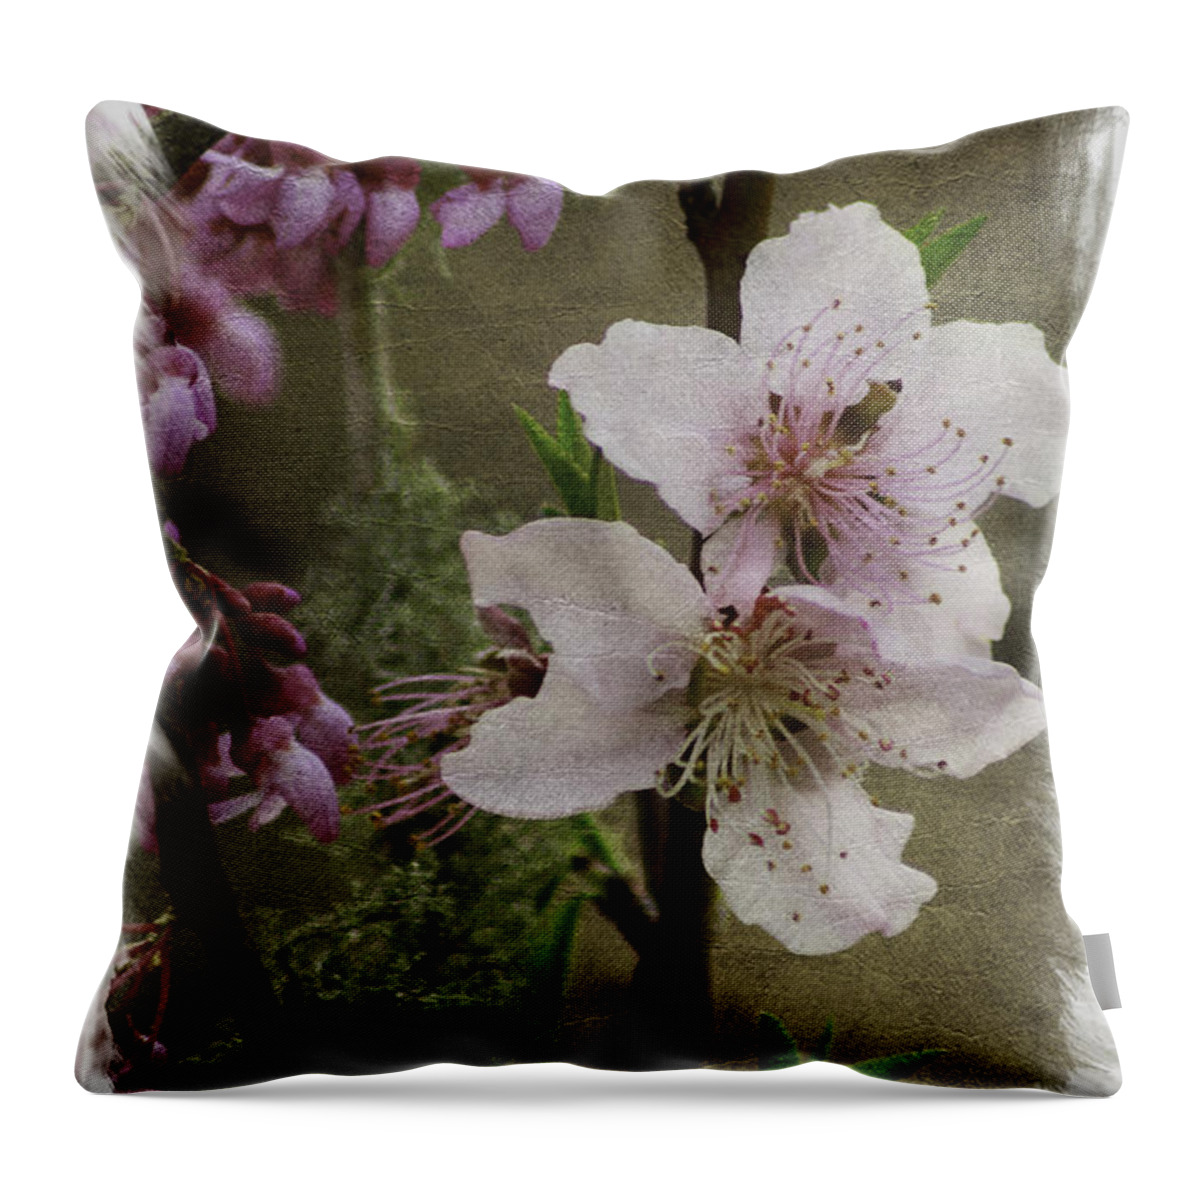 Peach Trees Throw Pillow featuring the photograph Into Spring Abstract #1 by Lori Mellen-Pagliaro